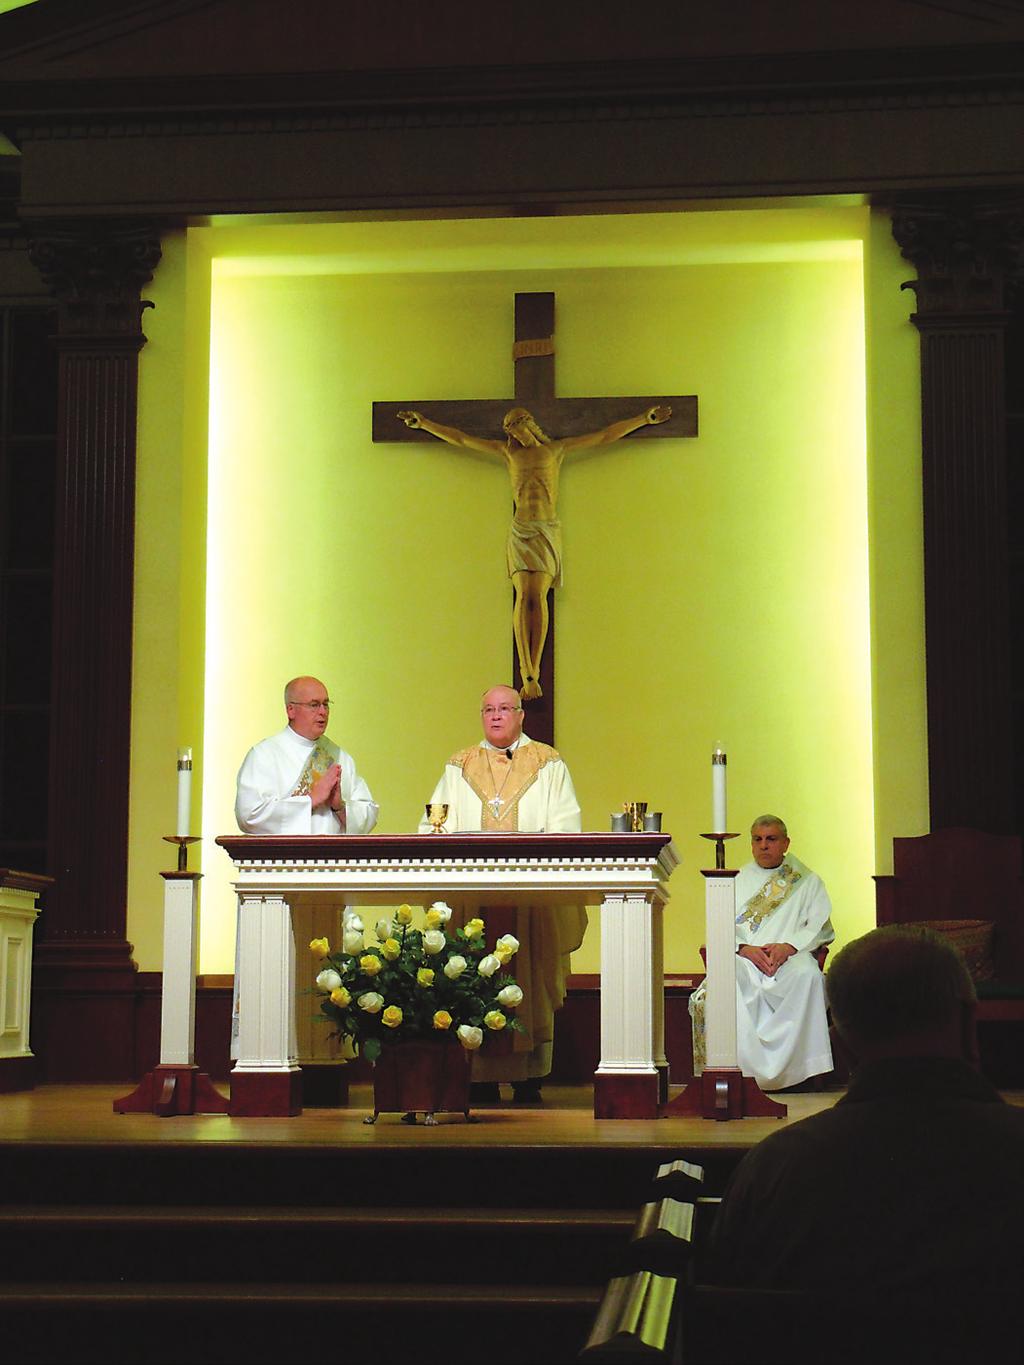 ANNUAL REPORT of the DIOCESE OF METUCHEN ORDINARY EXPENDITURES DEPARTMENT/OFFICE BISHOPRIC VICAR GENERAL AND MODERATOR OF THE CURIA OFFICE OF THE CHANCELLOR THE TRIBUNAL OFFICE OF CHILD AND YOUTH